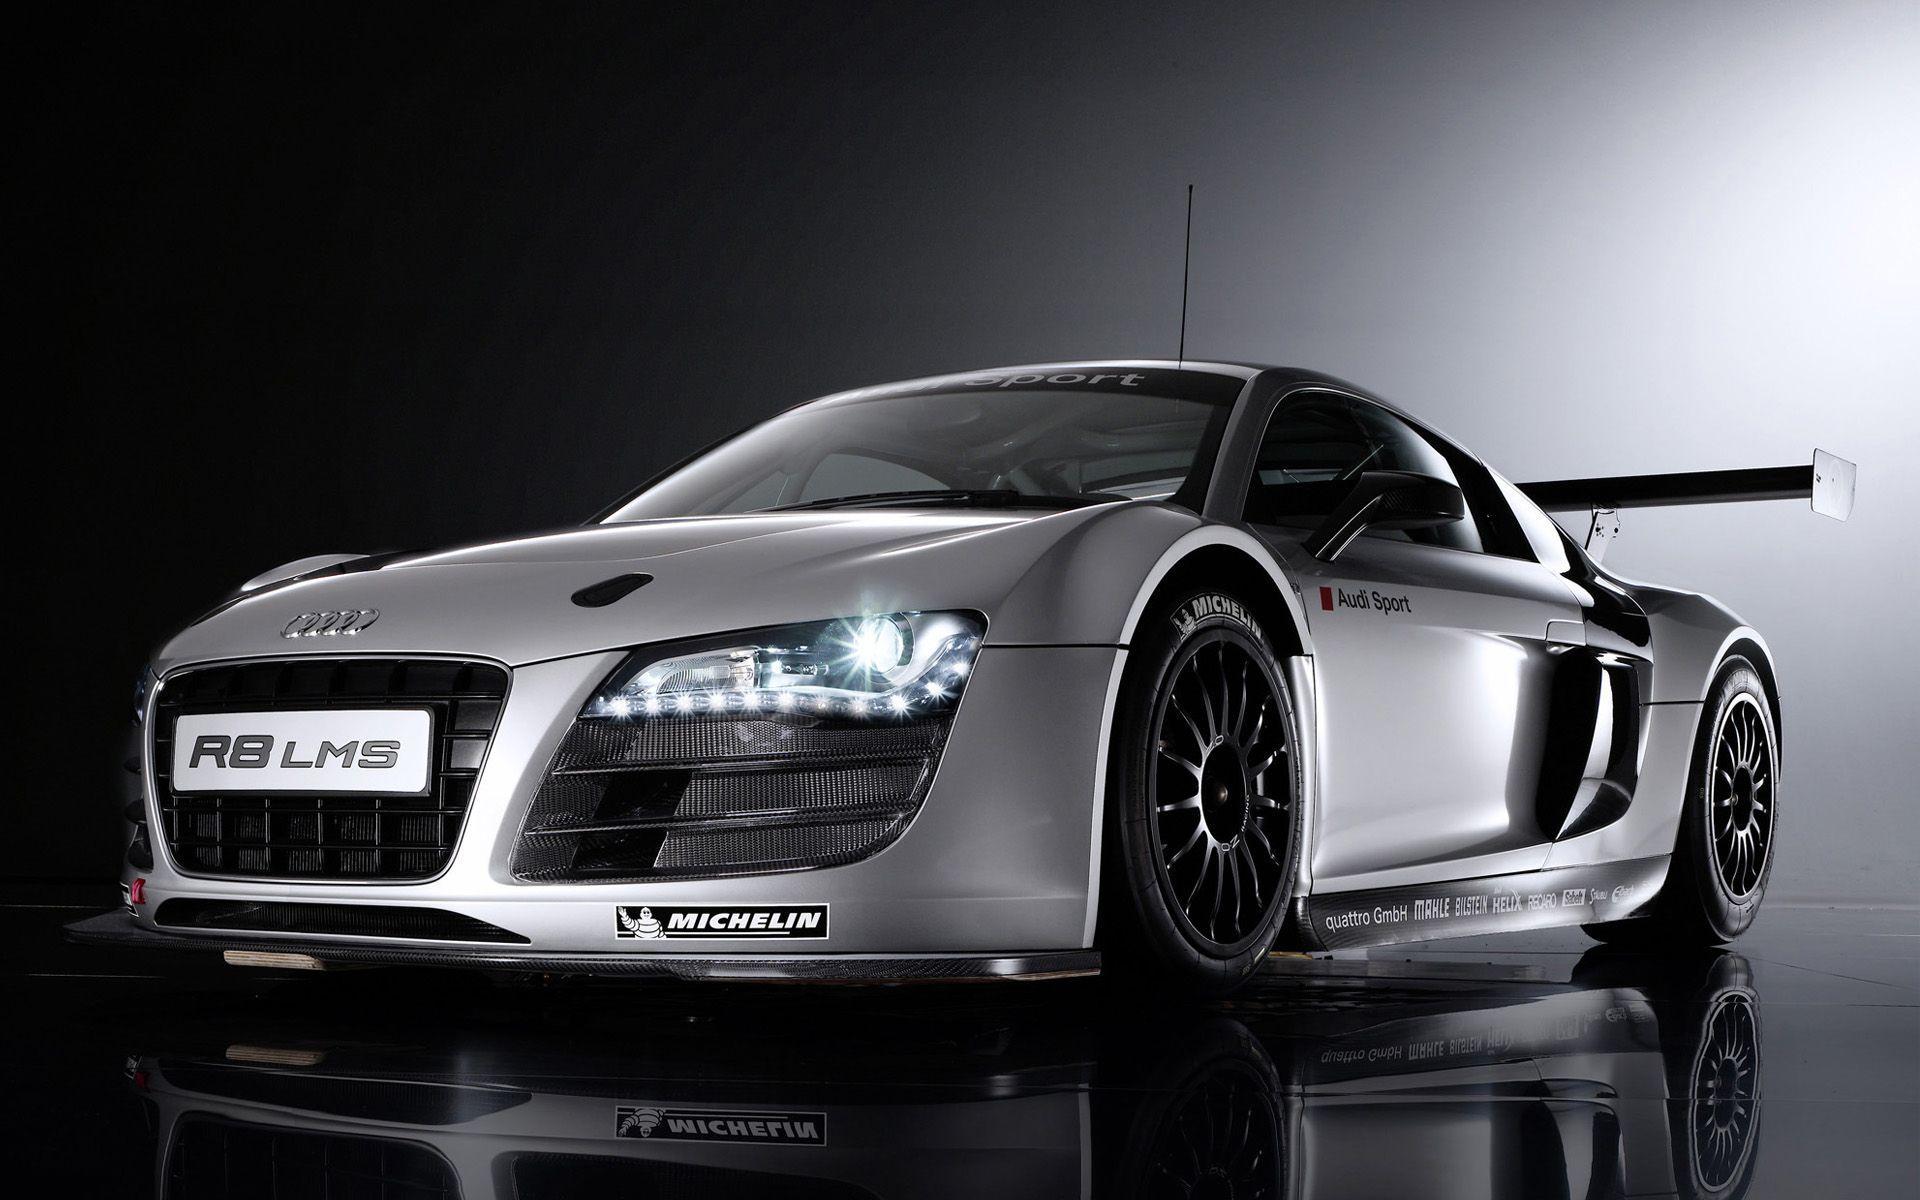 Nothing found for Audi R8 Wallpaper Full HD Wallpaper Search